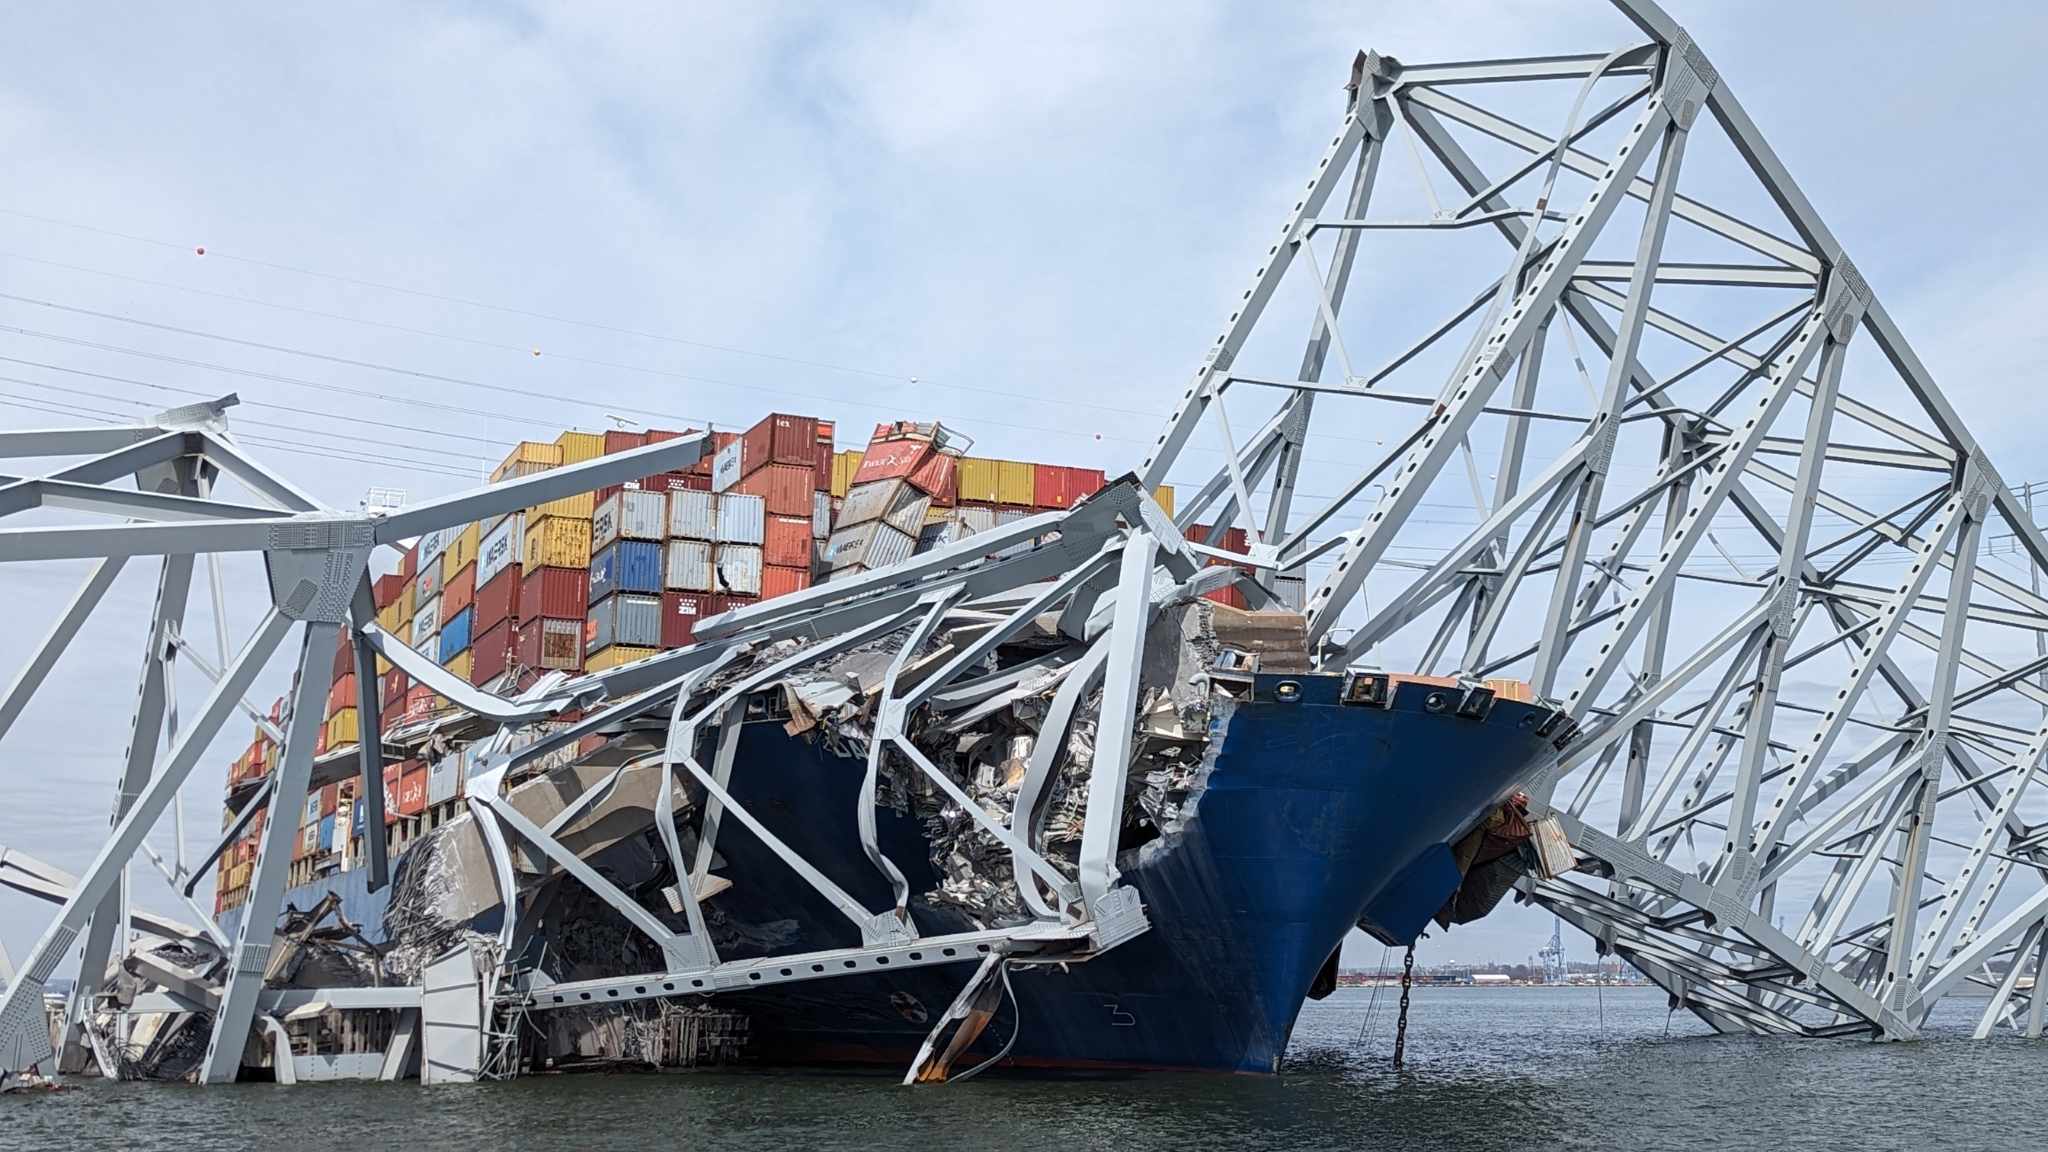 Baltimore Bridge Collapse Highlights Need to Protect Critical Foundations